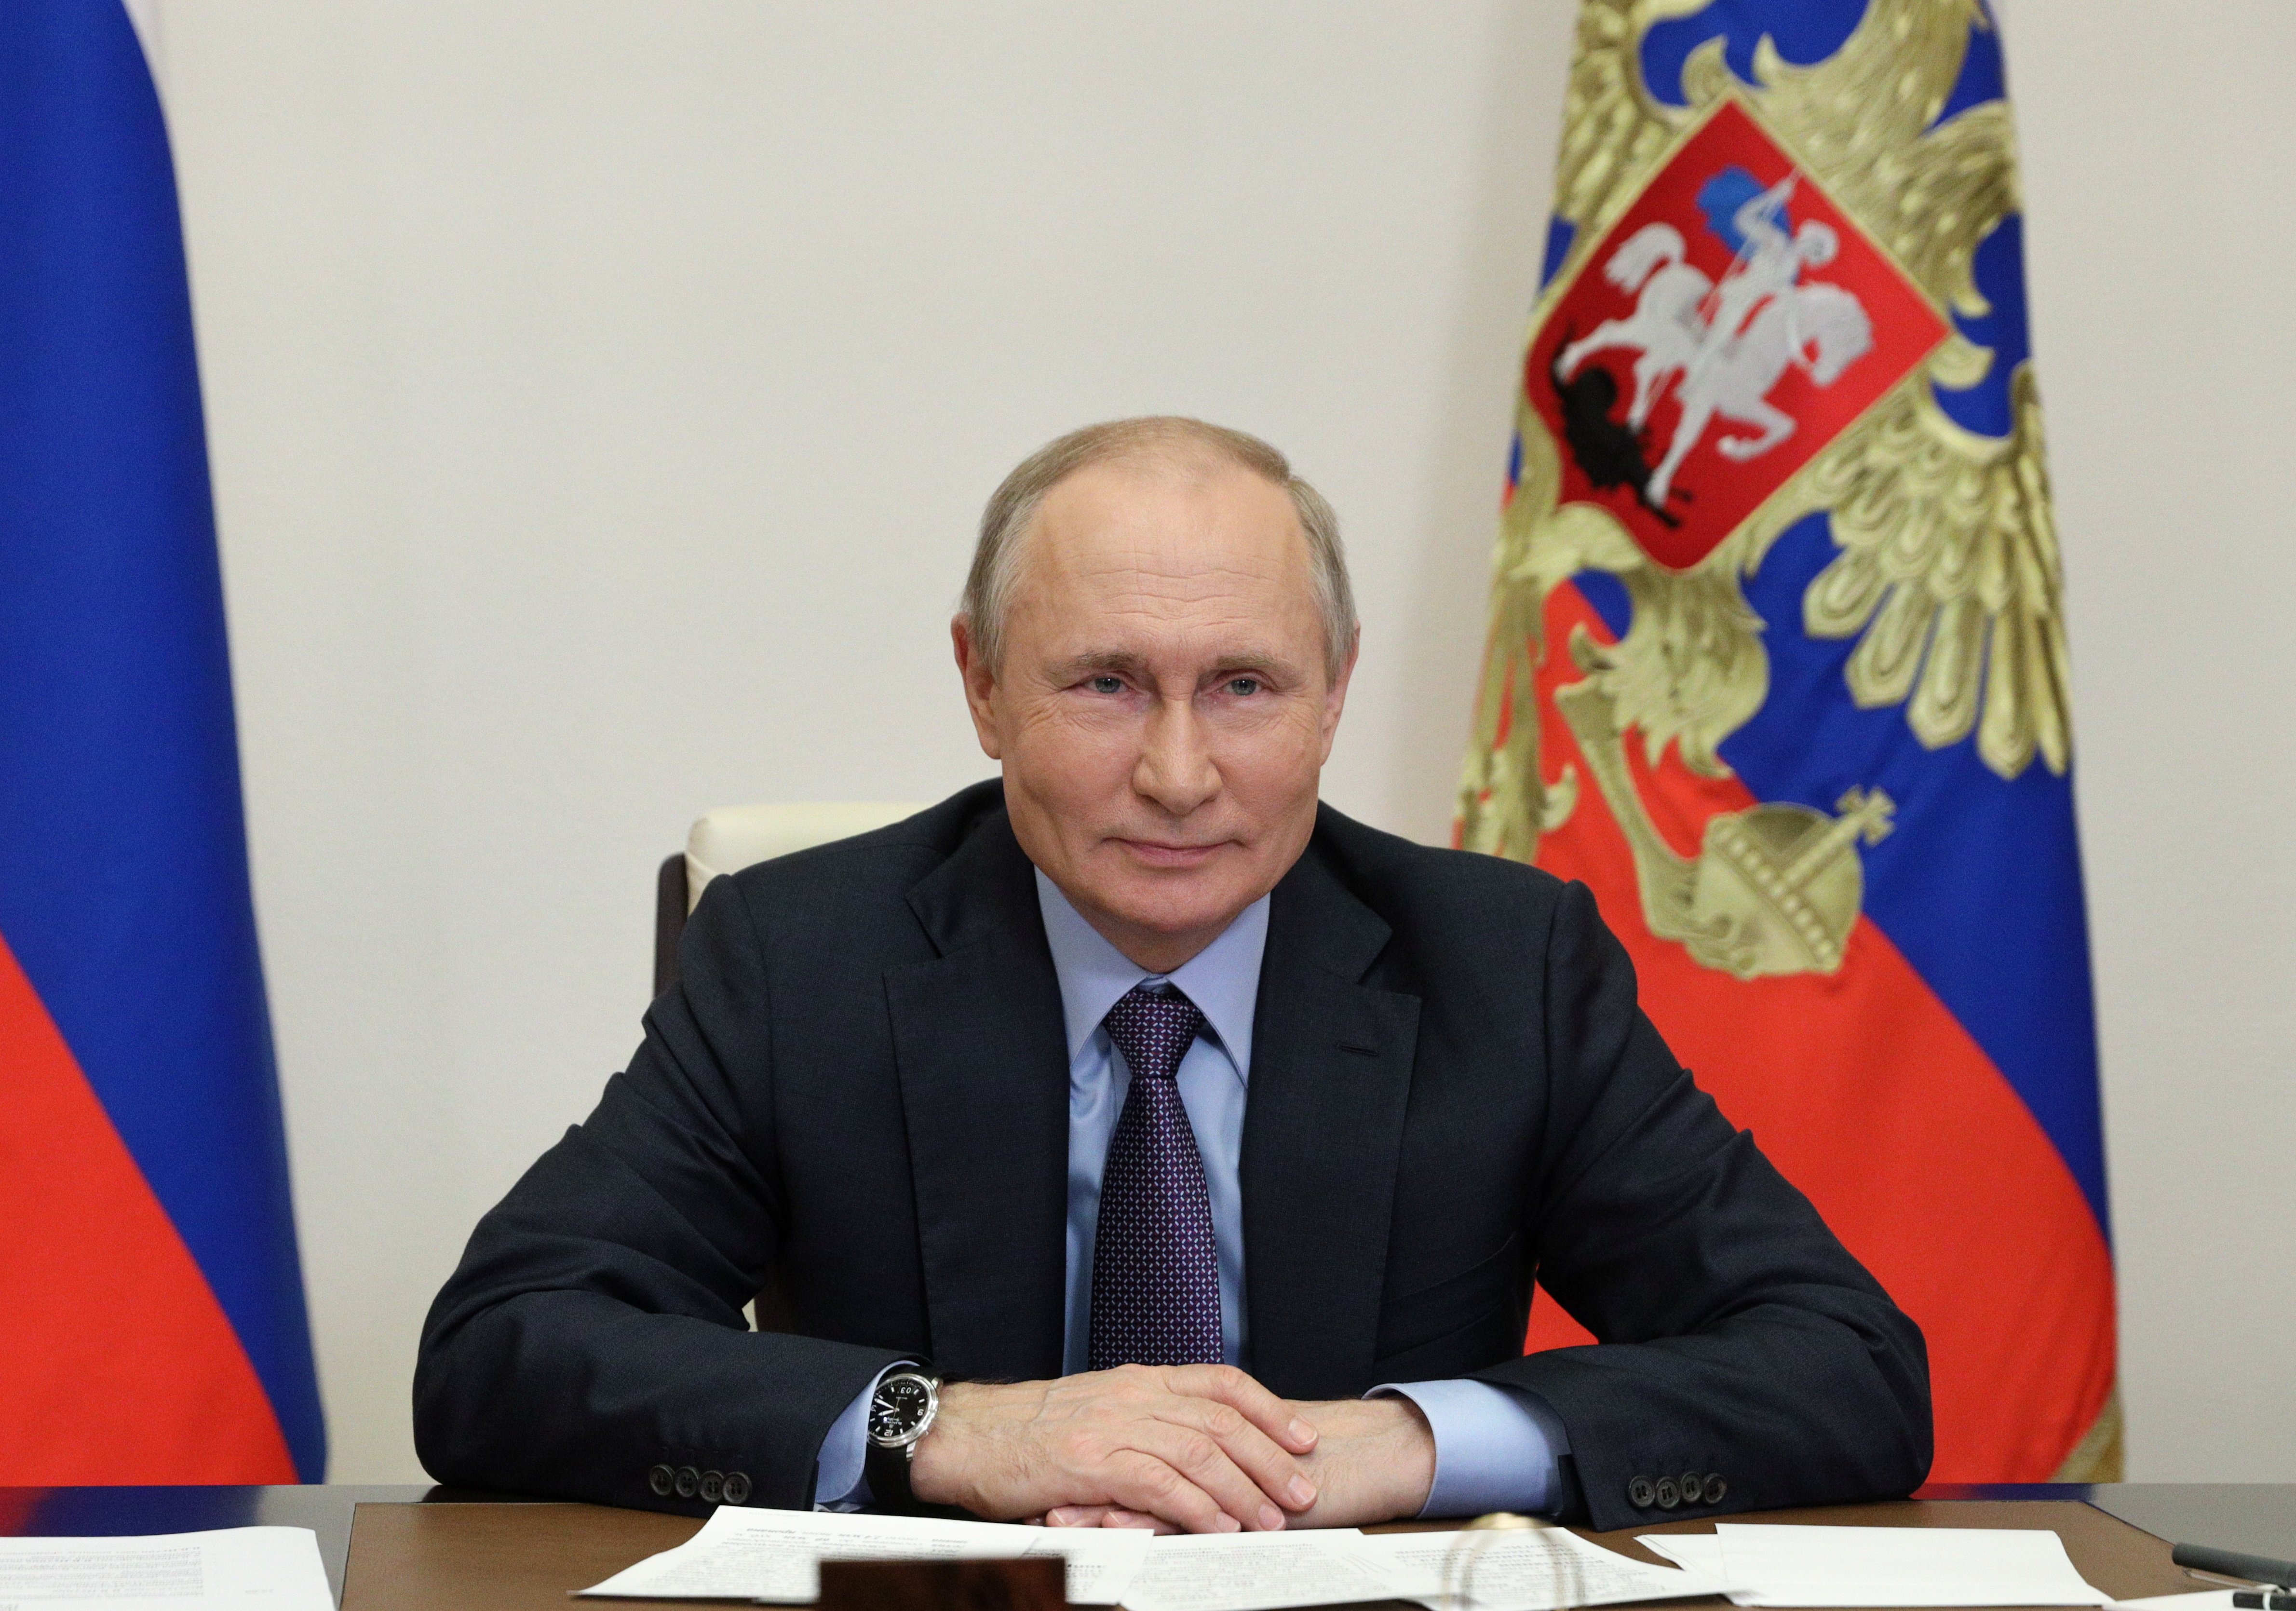 Russian President Putin takes part in a ceremony launching the Amur gas processing plant via video link outside Moscow